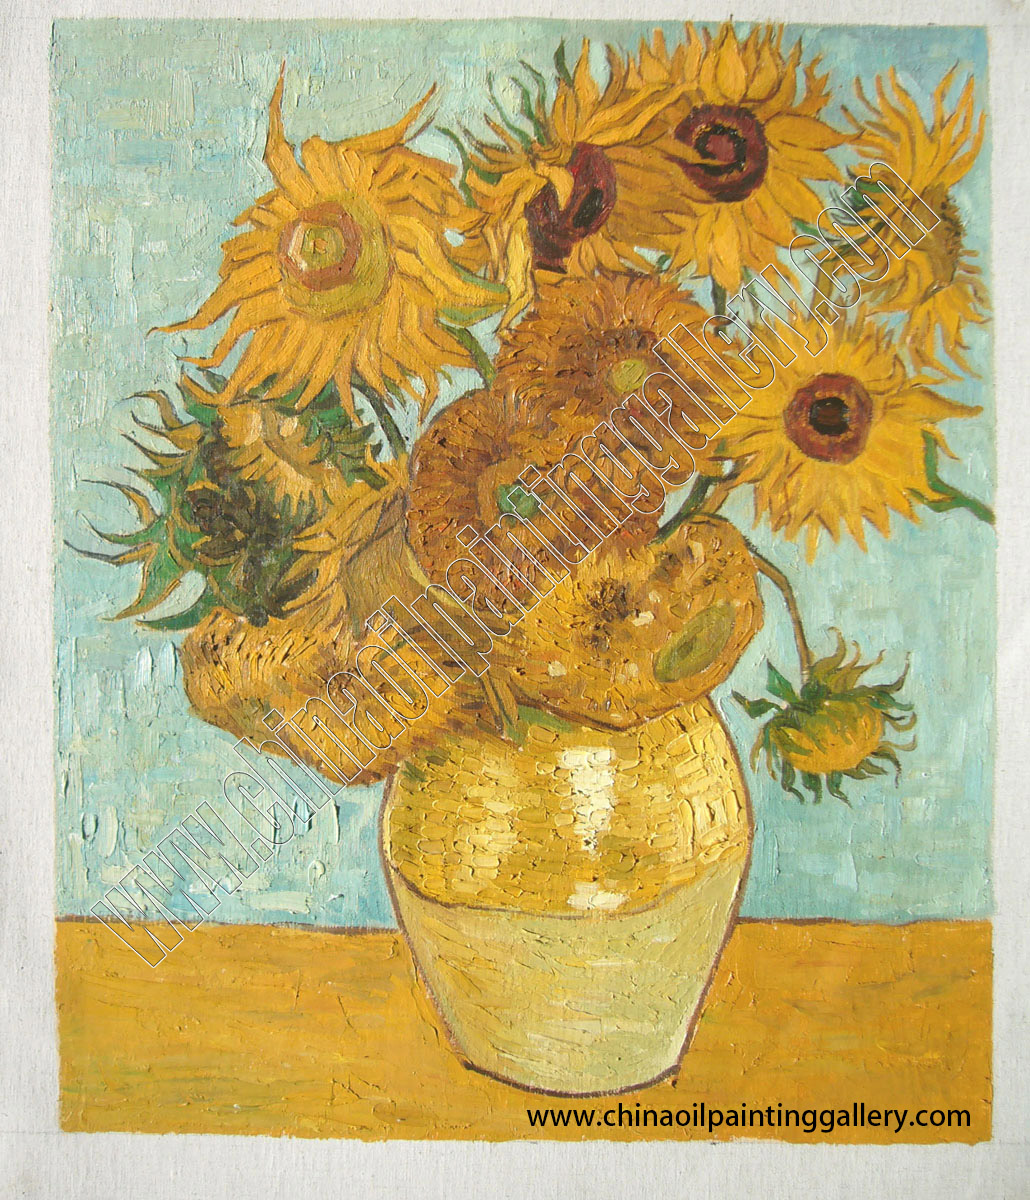 Vincent van Gogh Sunflowers - Oil painting reproductions 20